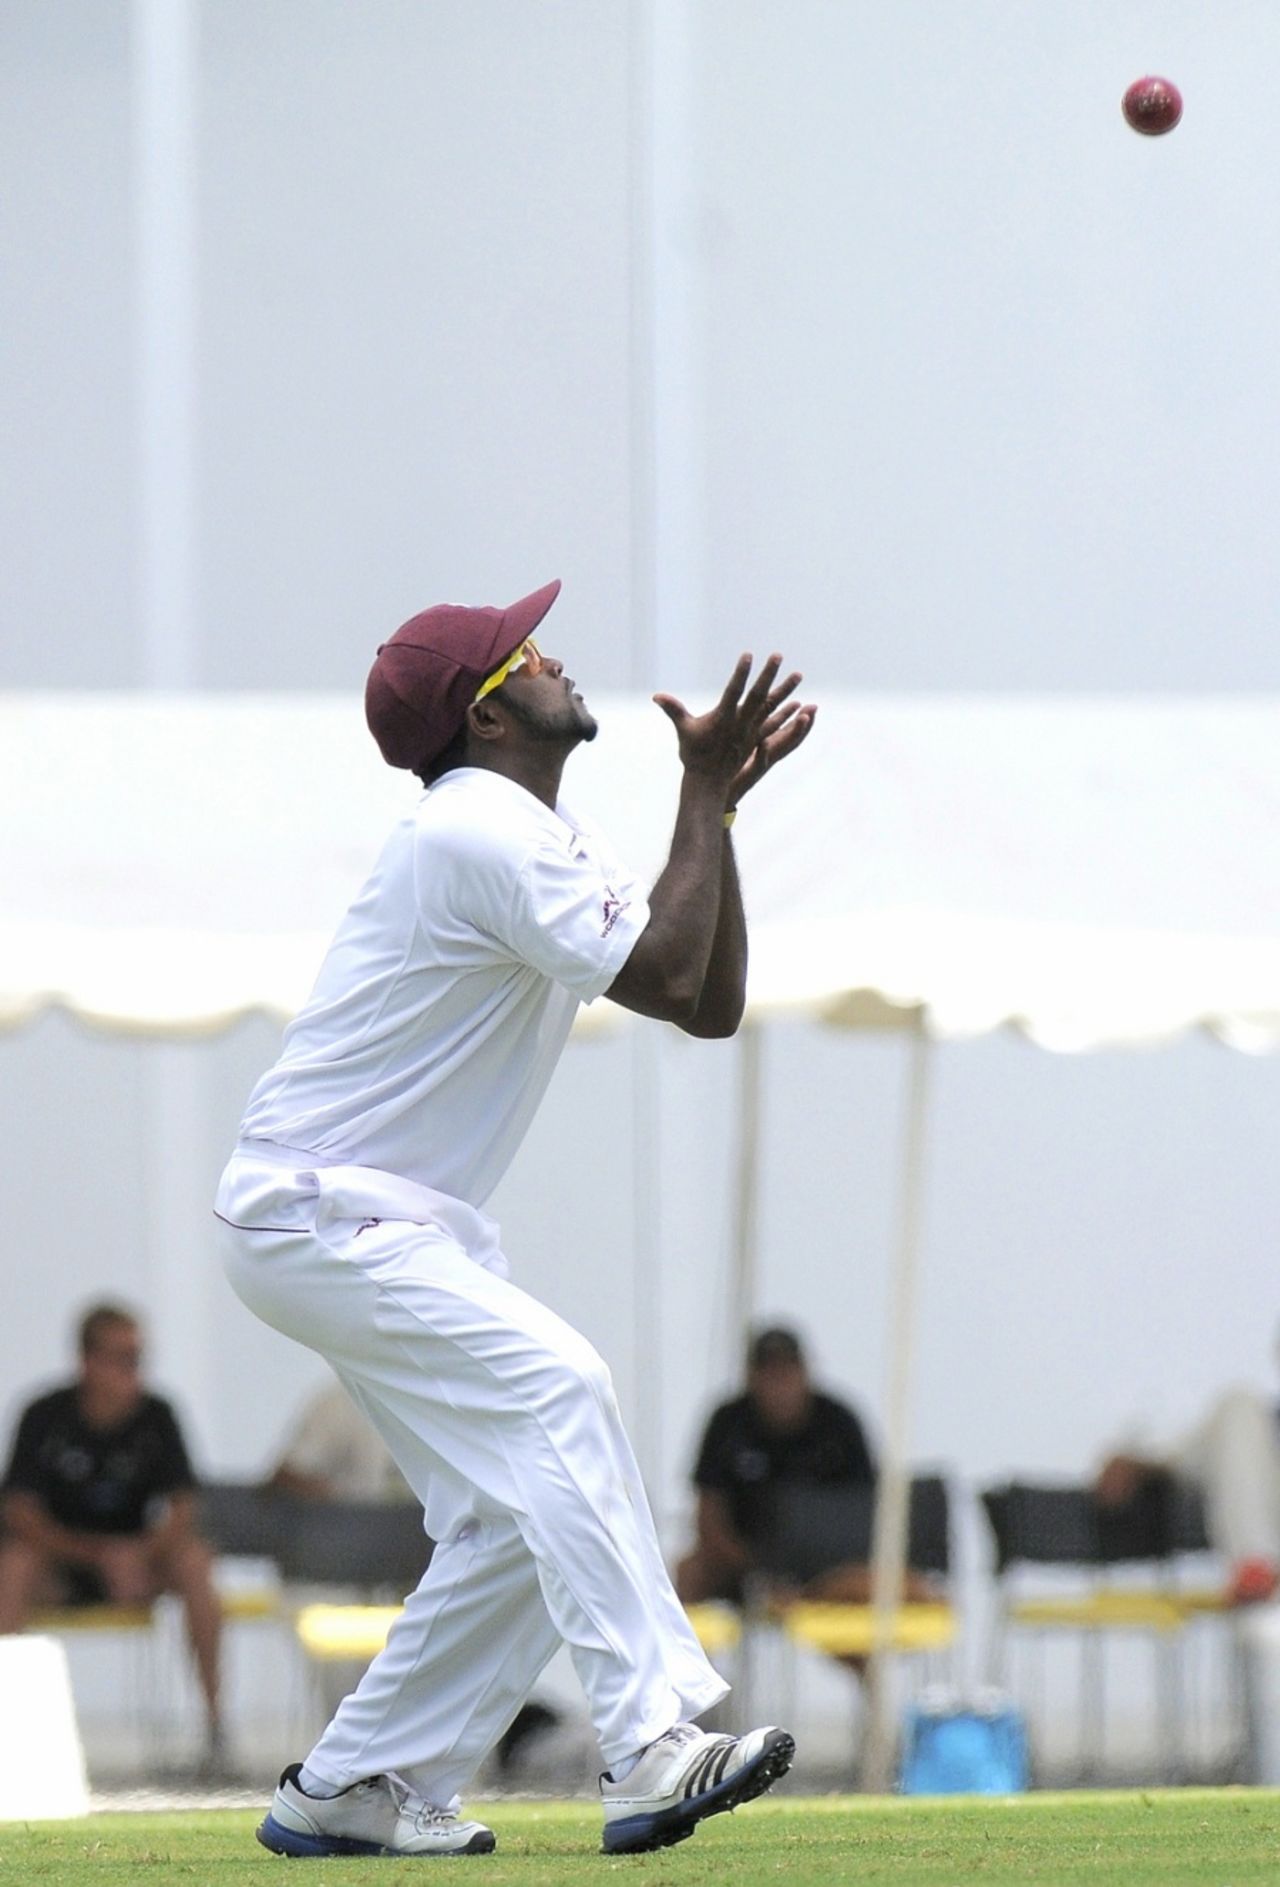 Narsingh Deonarine takes the catch to get rid of Daniel Vettori, West Indies v New Zealand, 1st Test, Antigua, 2nd day, July 26, 2012